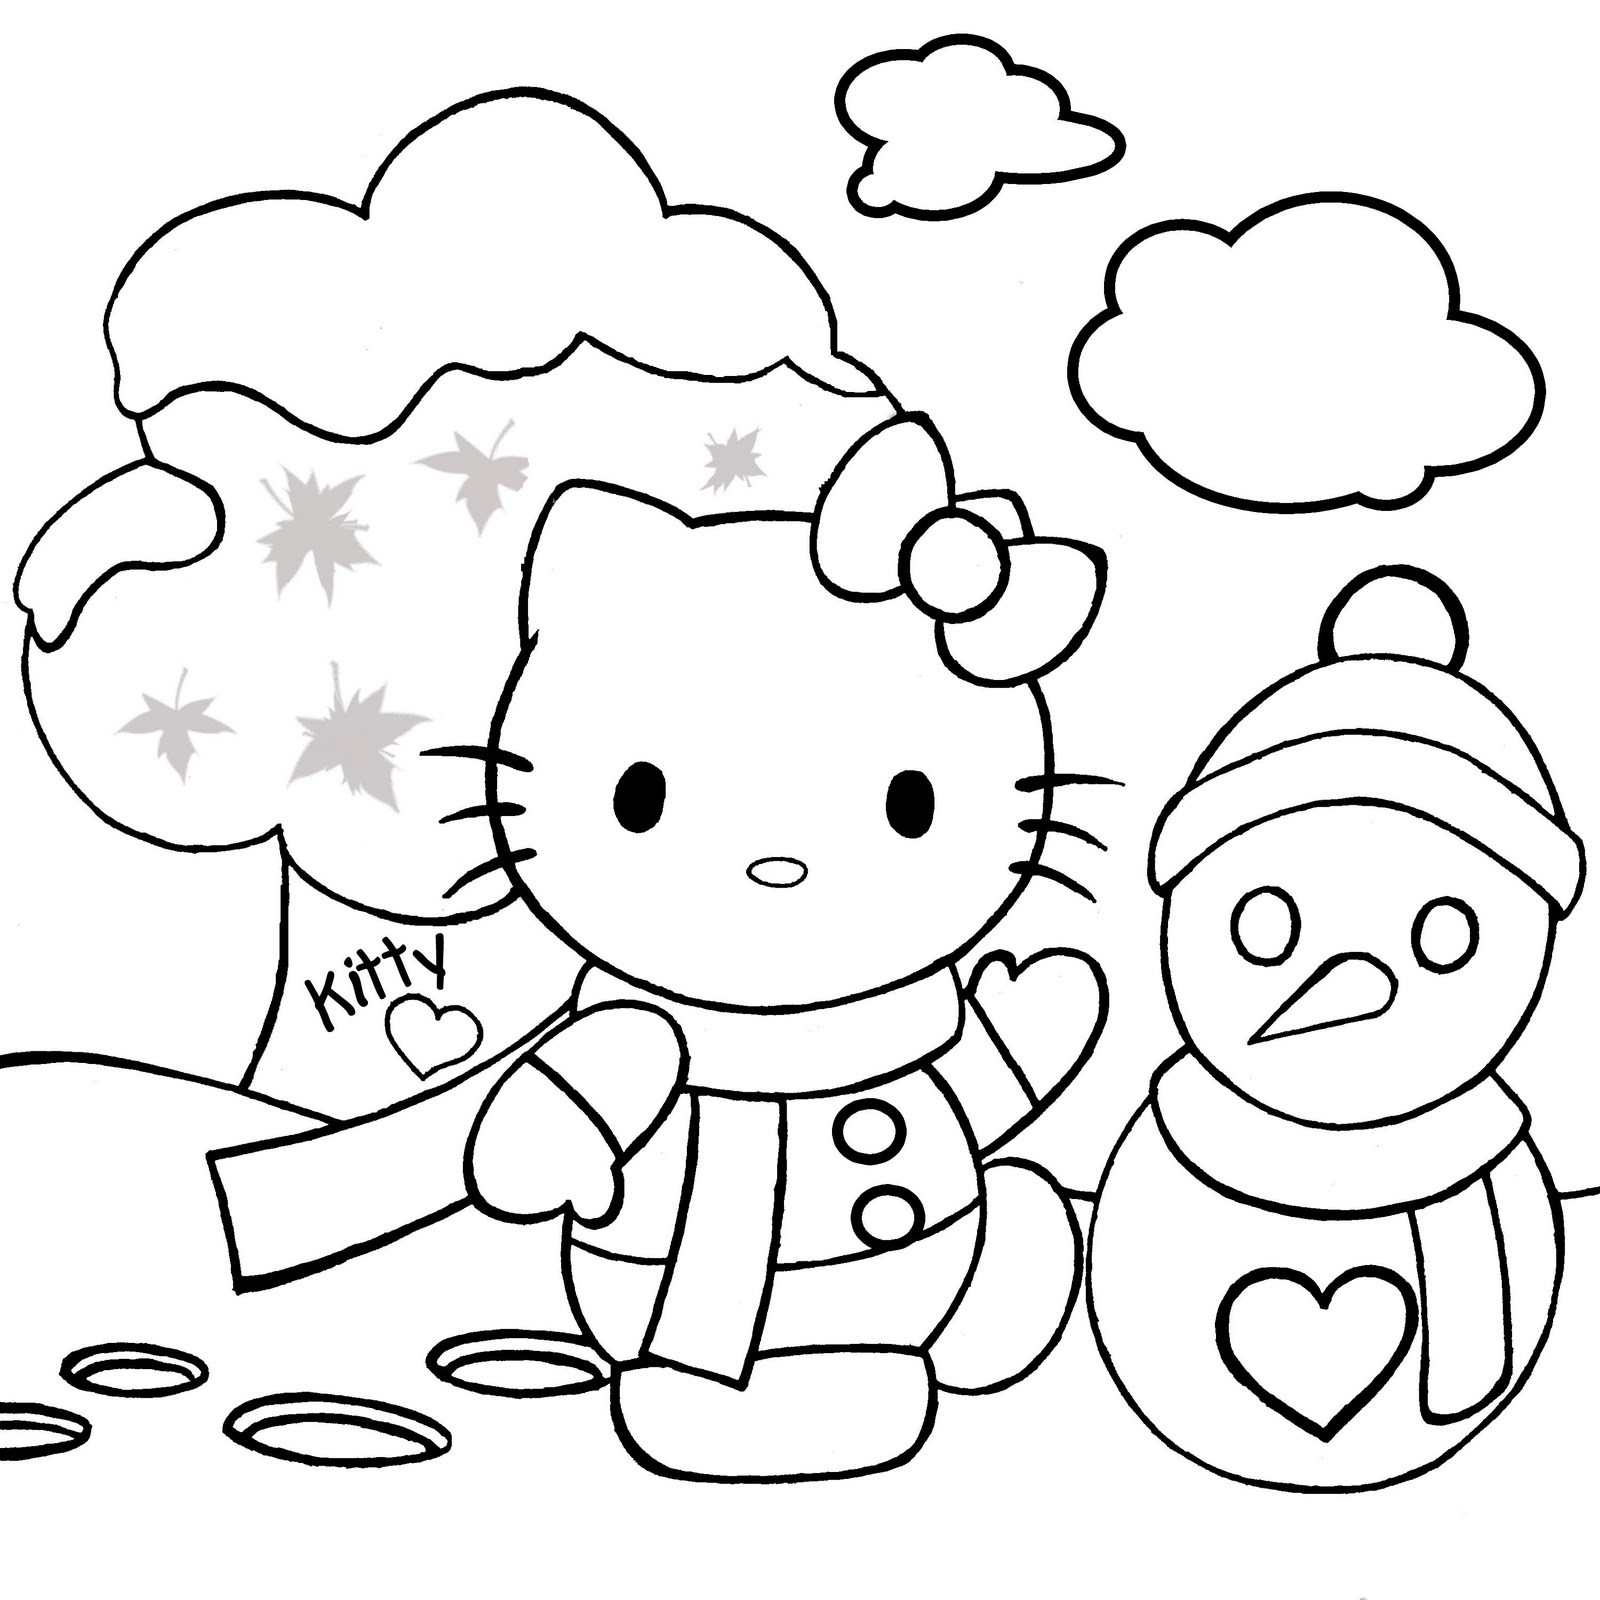 Christmas Coloring Pages For Kids
 Hello Kitty Christmas Coloring Pages 1